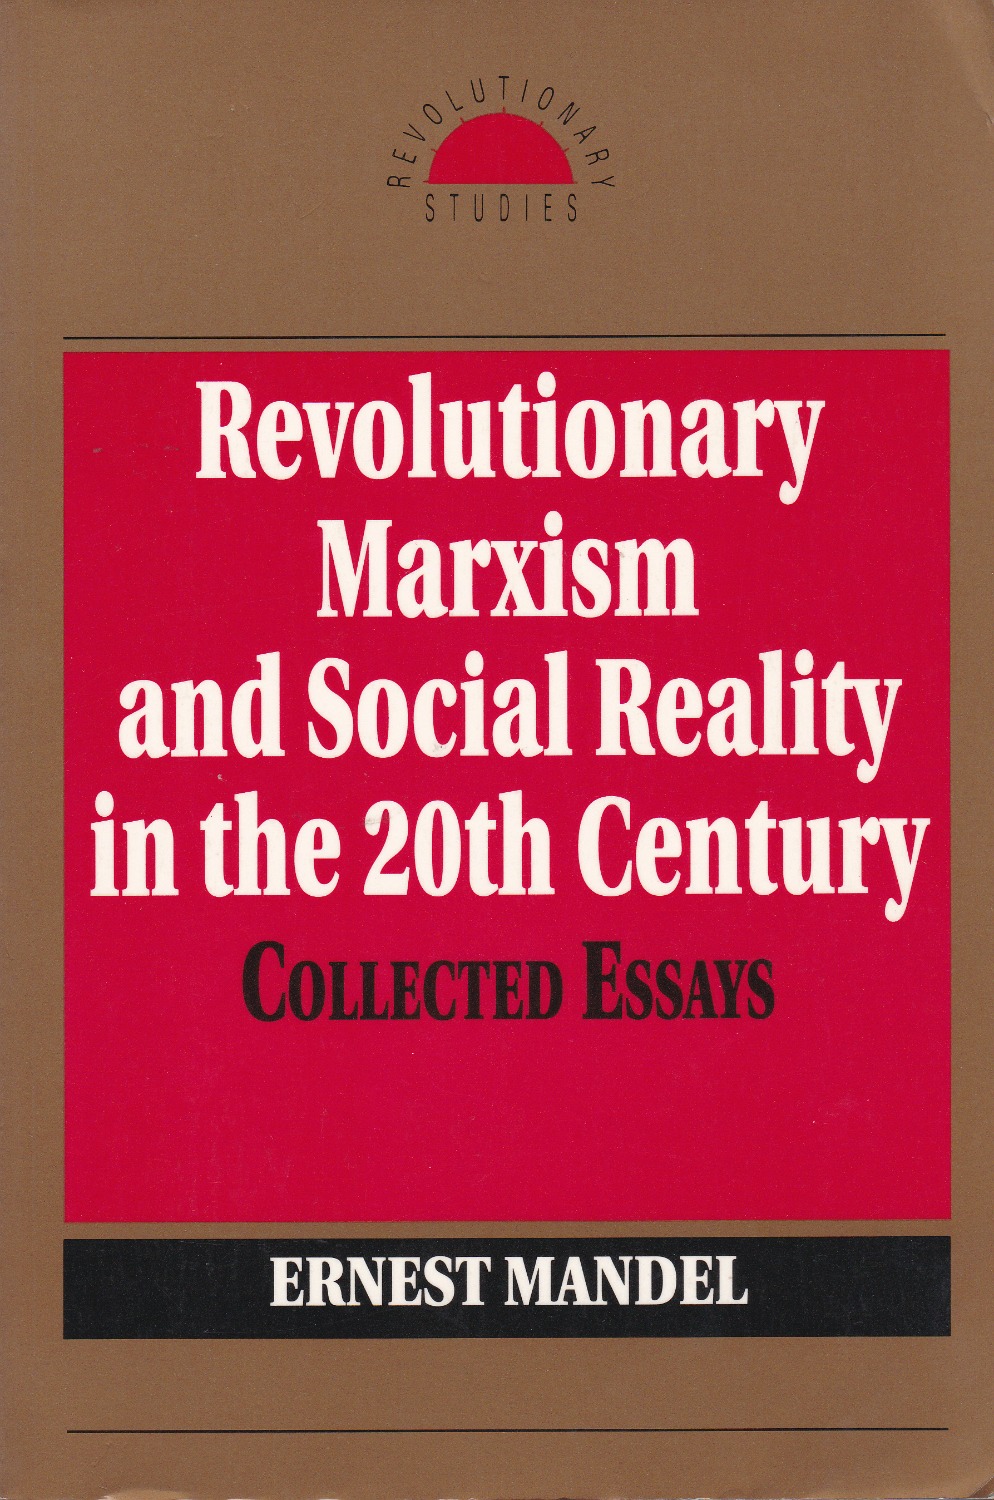 Revolutionary Marxism and social reality in the 20th century.